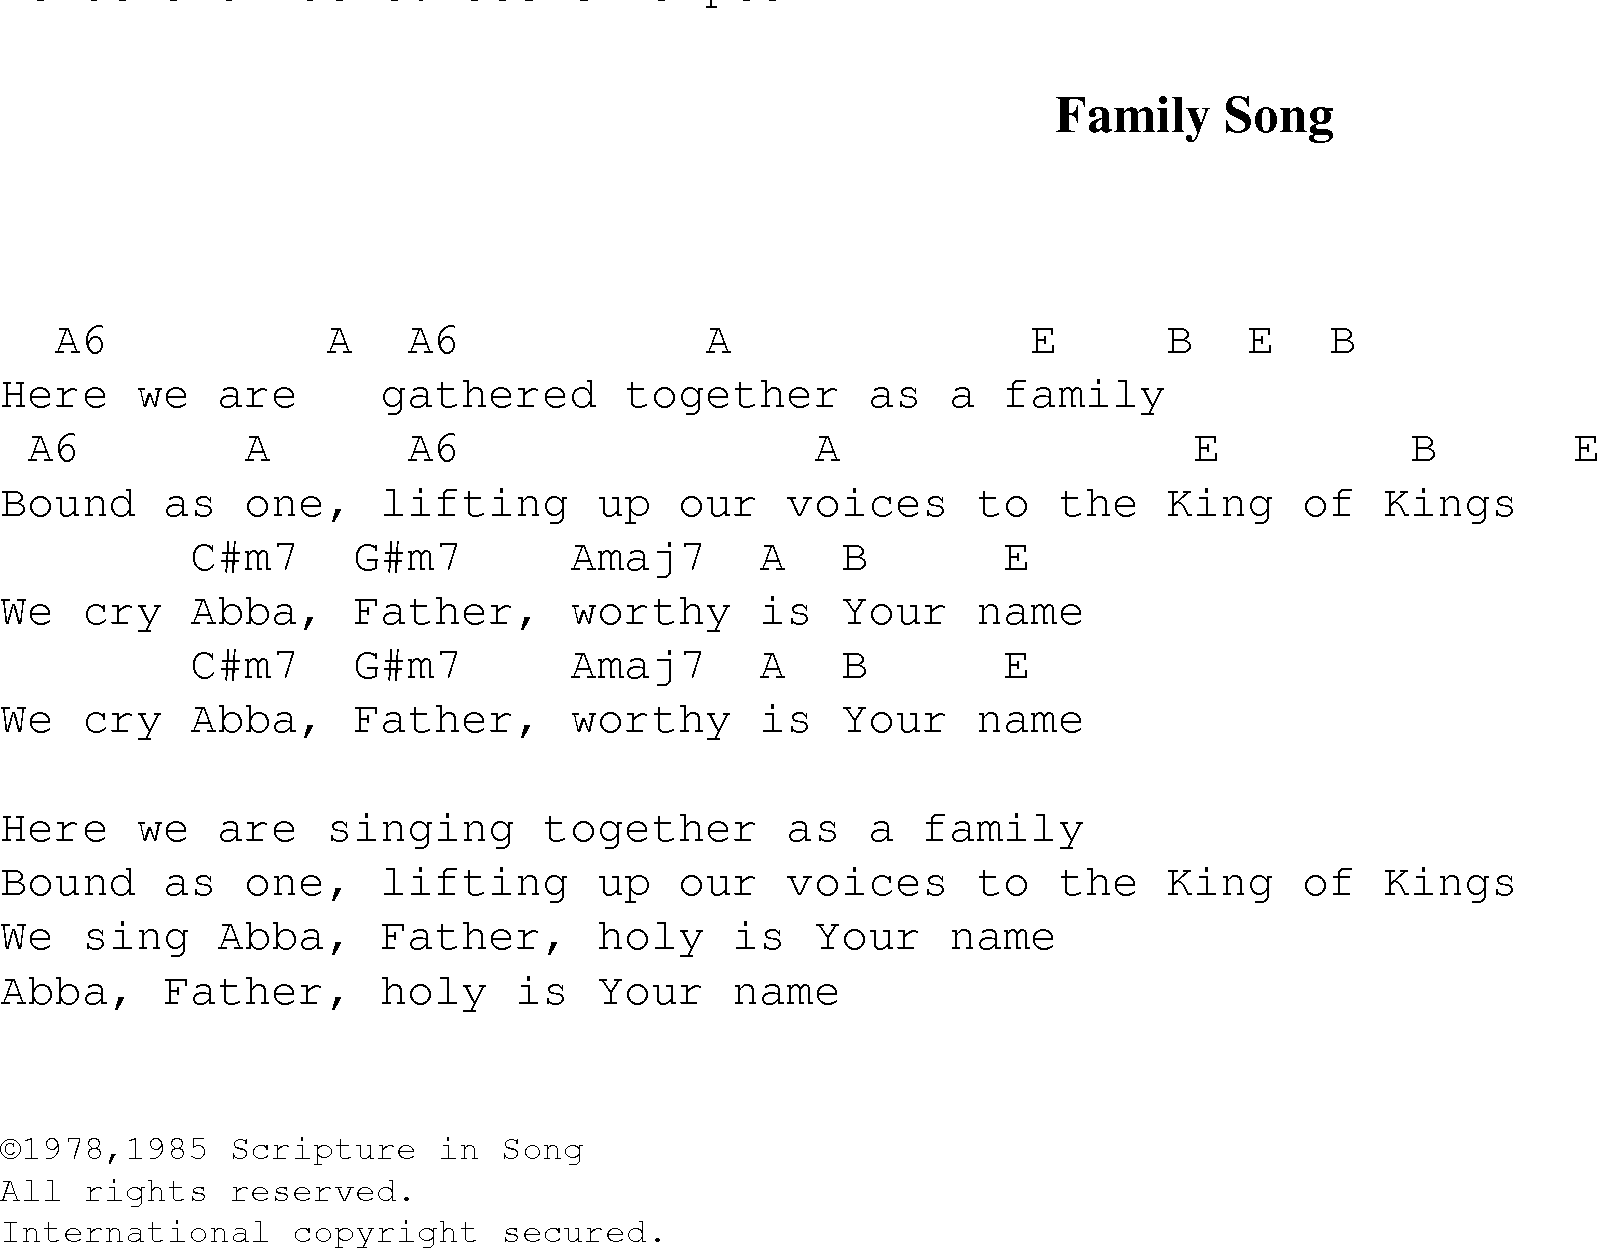 Gospel Song: familly_song, lyrics and chords.